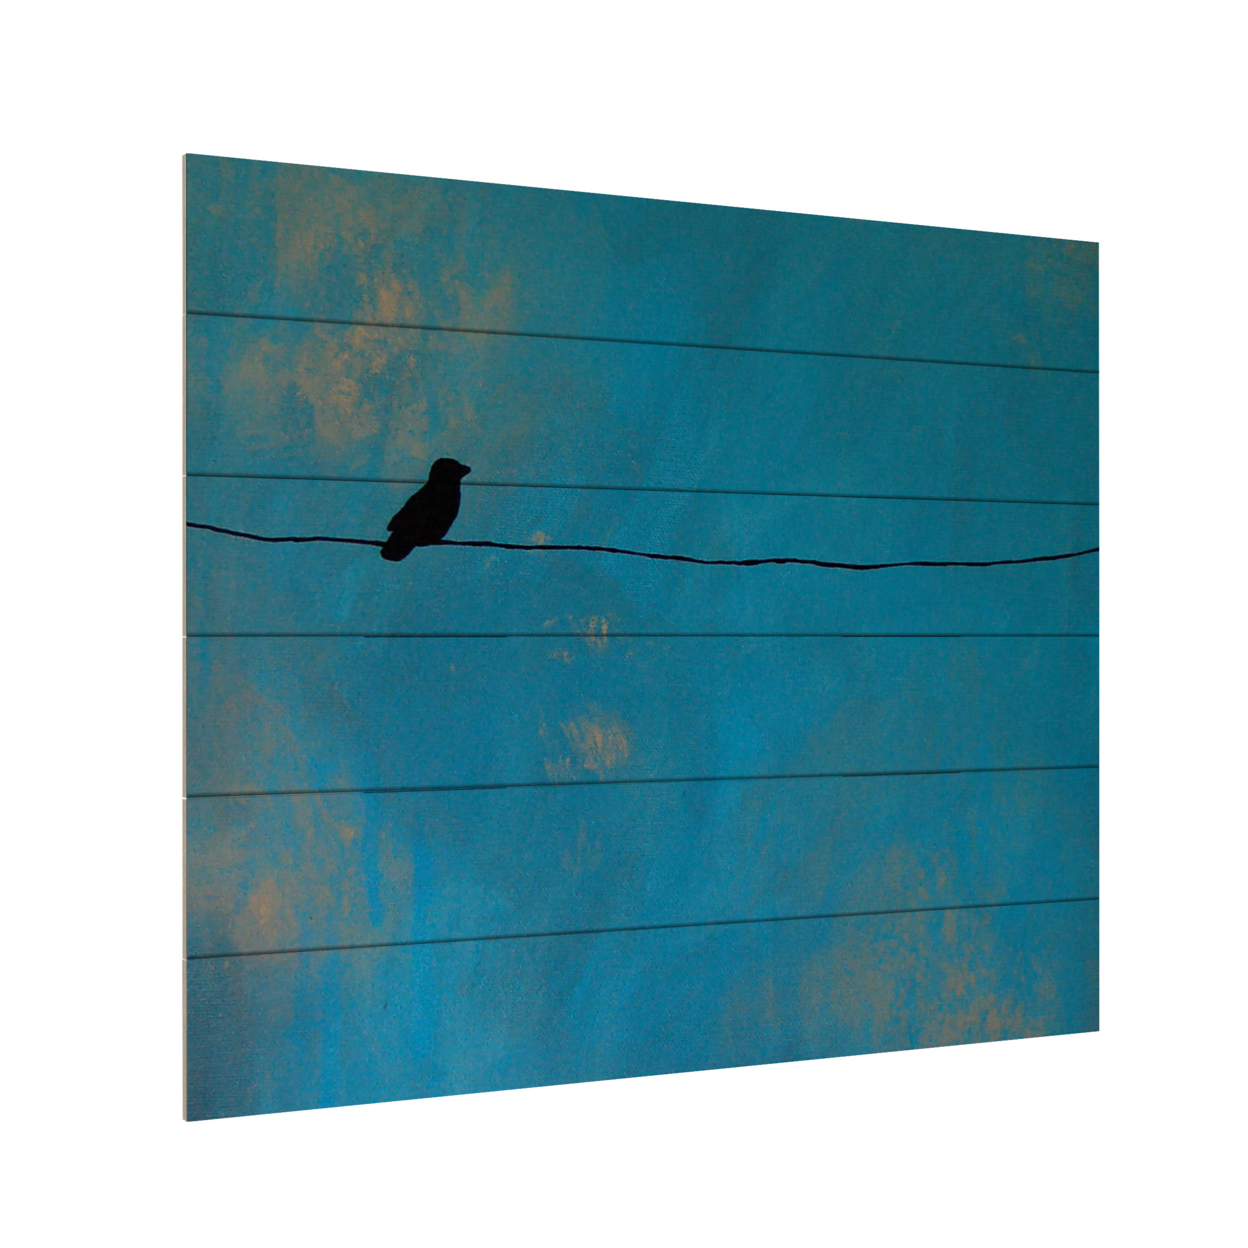 Wooden Slat Art 18 X 22 Inches Titled Lone Bird Blue Ready To Hang Home Decor Picture